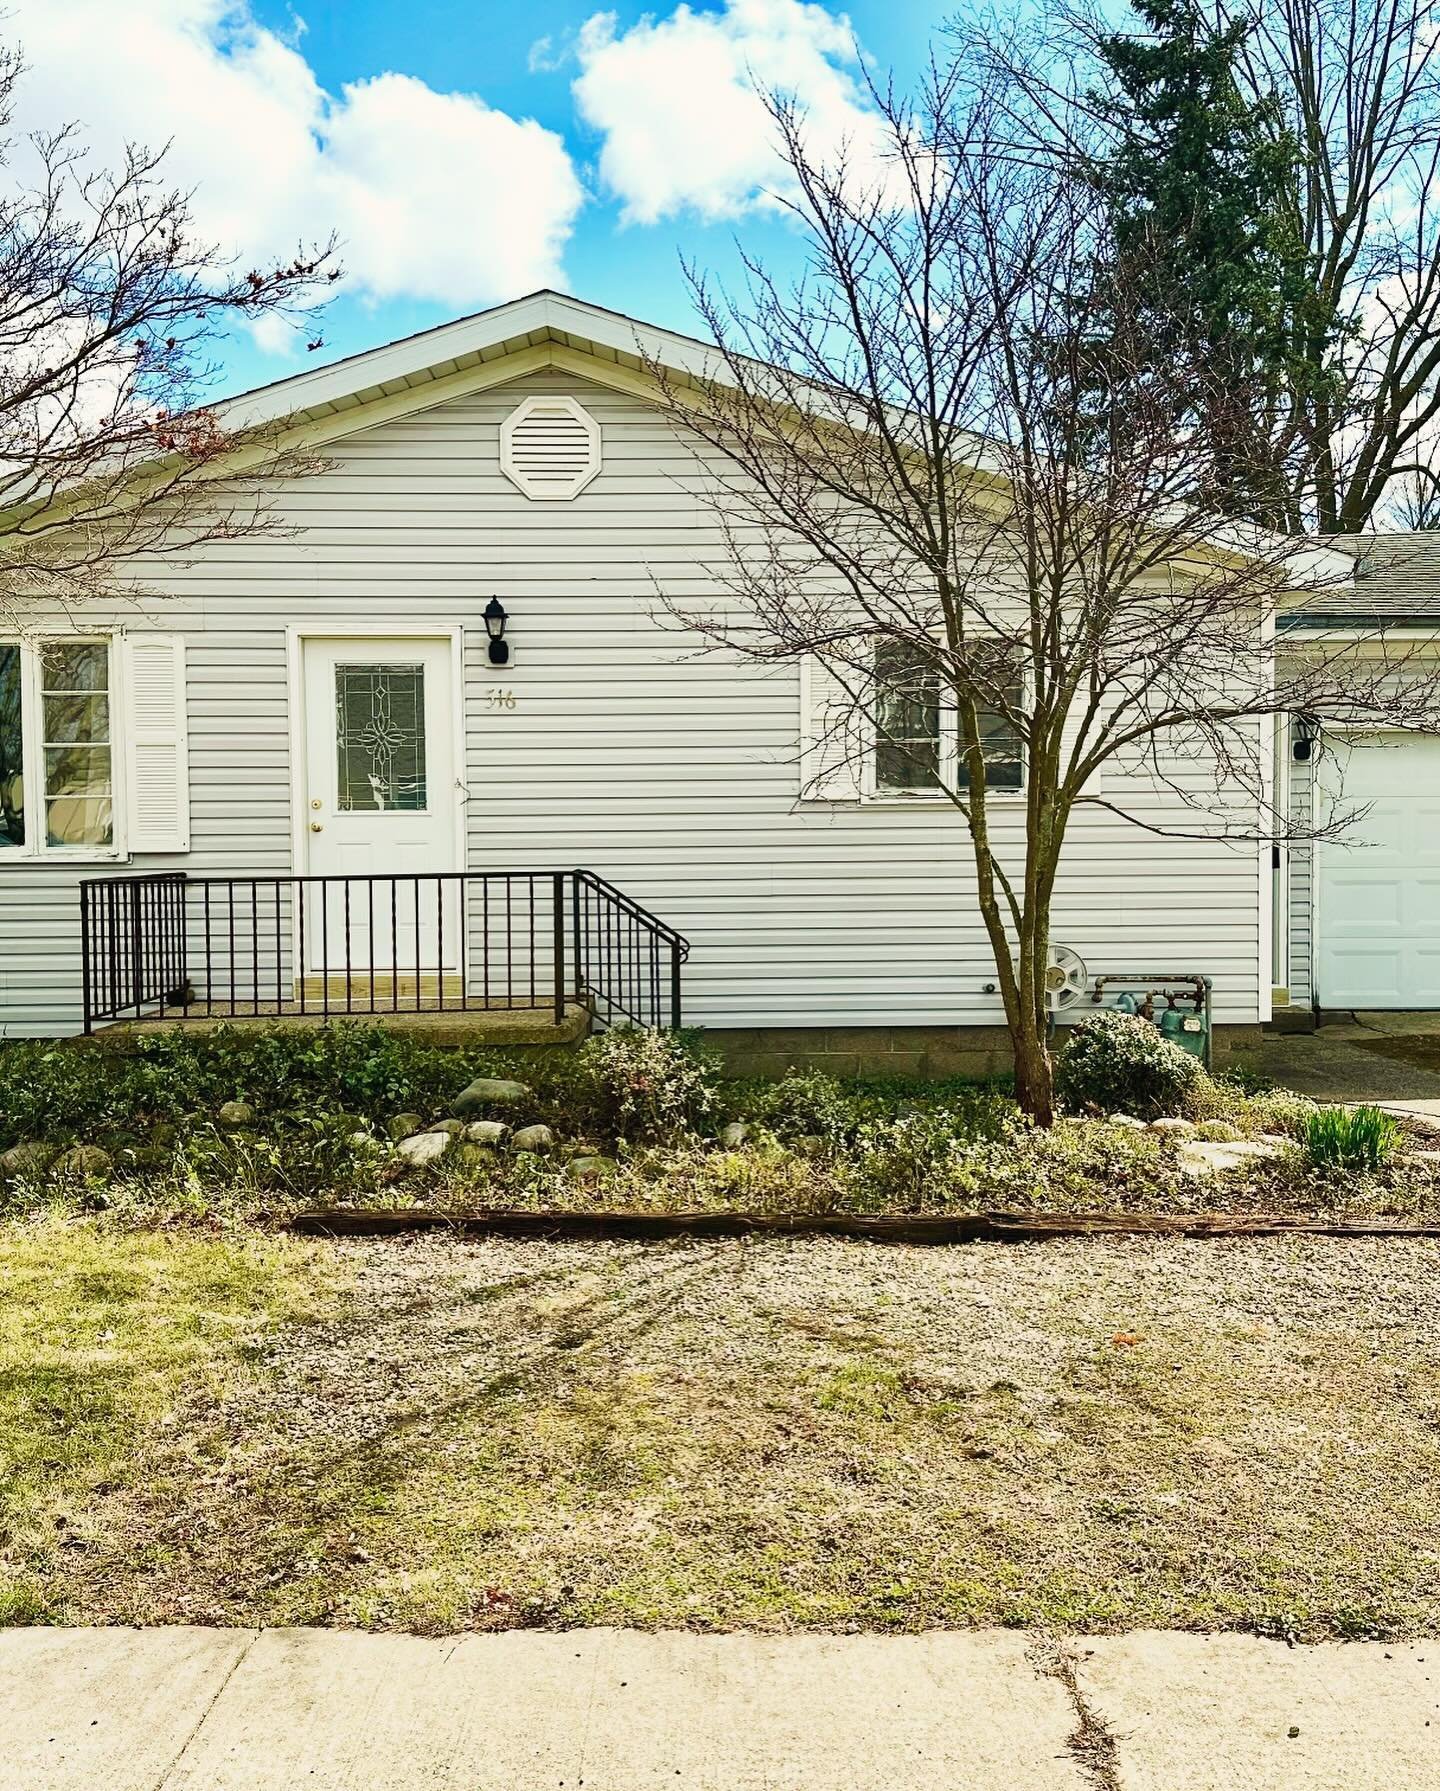 Auction Tomorrow ! Goshen Home at Public Auction Saturday, May 11, 2024 at 10:30 AM, 516 New York St., 3 bedroom 2 bath, attached garage, fenced backyard. Down to the studs renovation by a master carpenter and ready for your own finishing touches. Fi